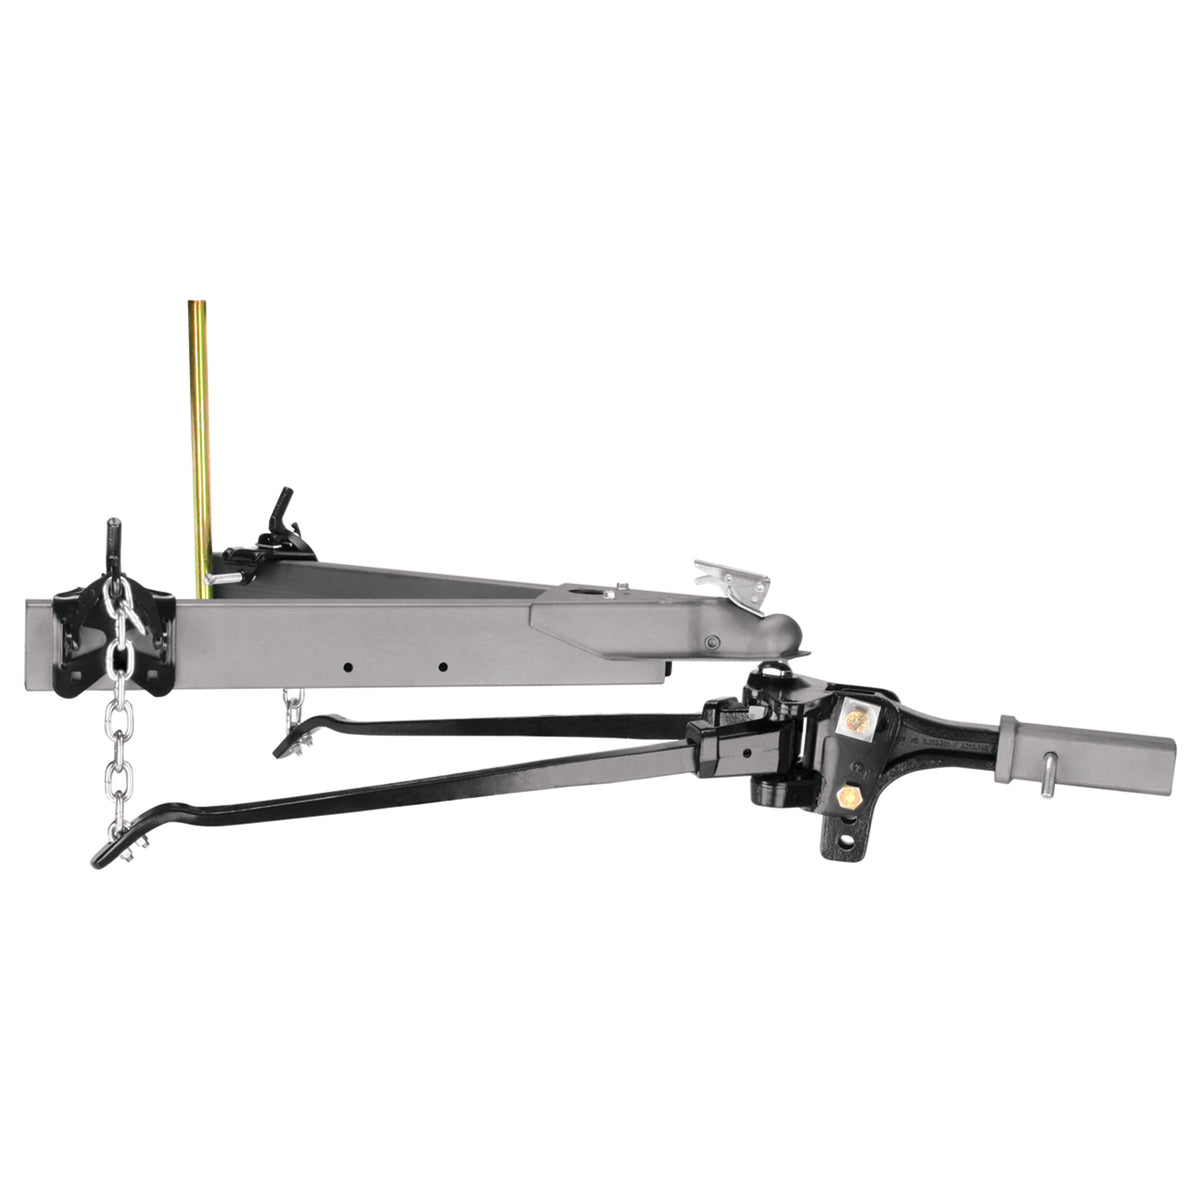 Reese 66540 High-Performance Trunnion Kit with Adjustable Hitch Bar - 10000/600 lbs. (GTW/TW)